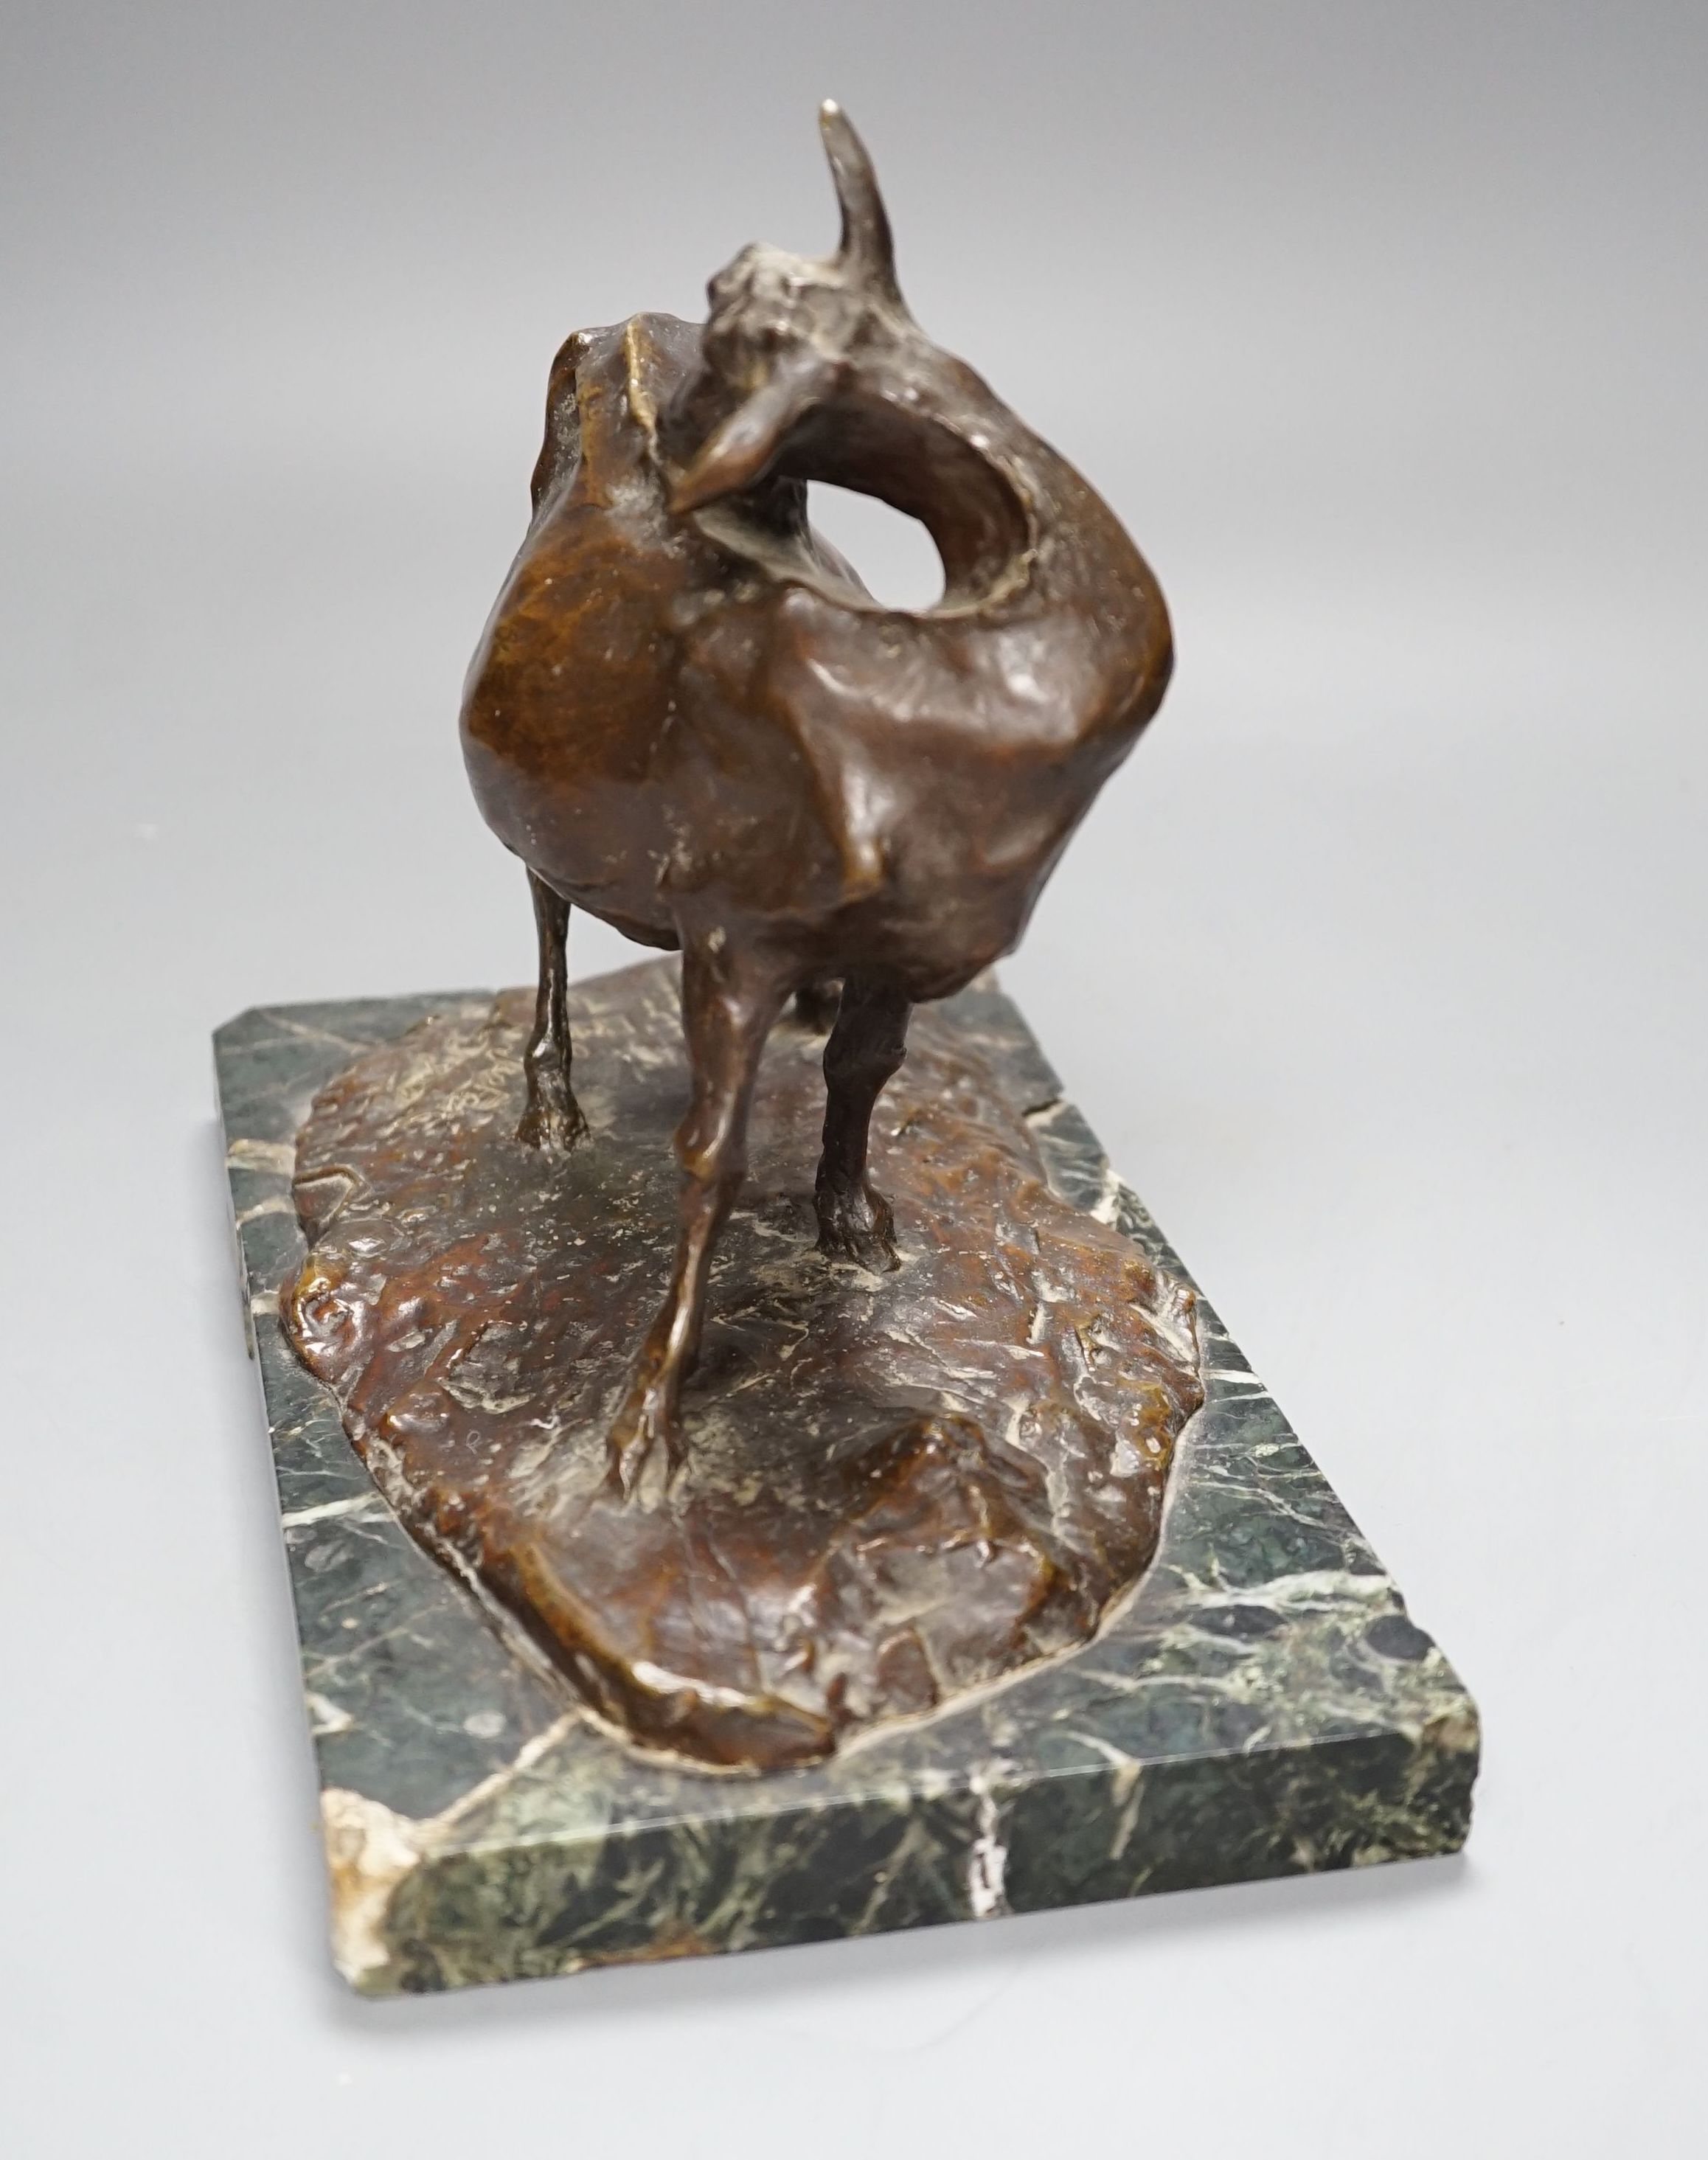 A bronze sculpture depicting a goat, on marble base by Robert Greter, dated 1910 - 20cm high